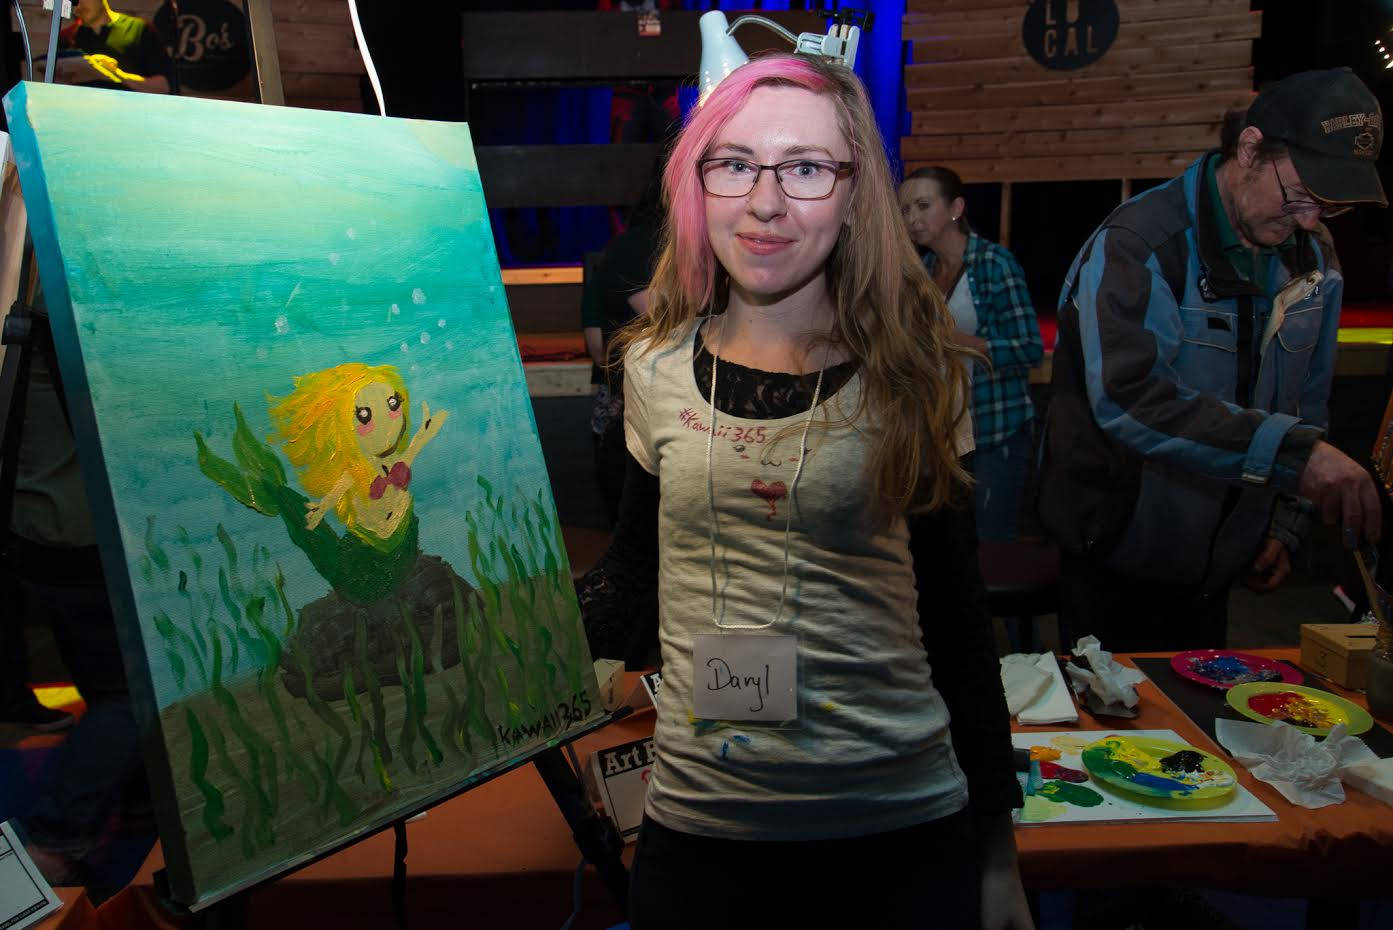 CREATIVITY - Daryl Januszewski, seen here at Red Deer’s Art Battle, recently completed her project Kawaii365. Januszewski created 365 art projects and left them throughout the City to promote the arts scene and brighten peoples’ days.                                photo submitted